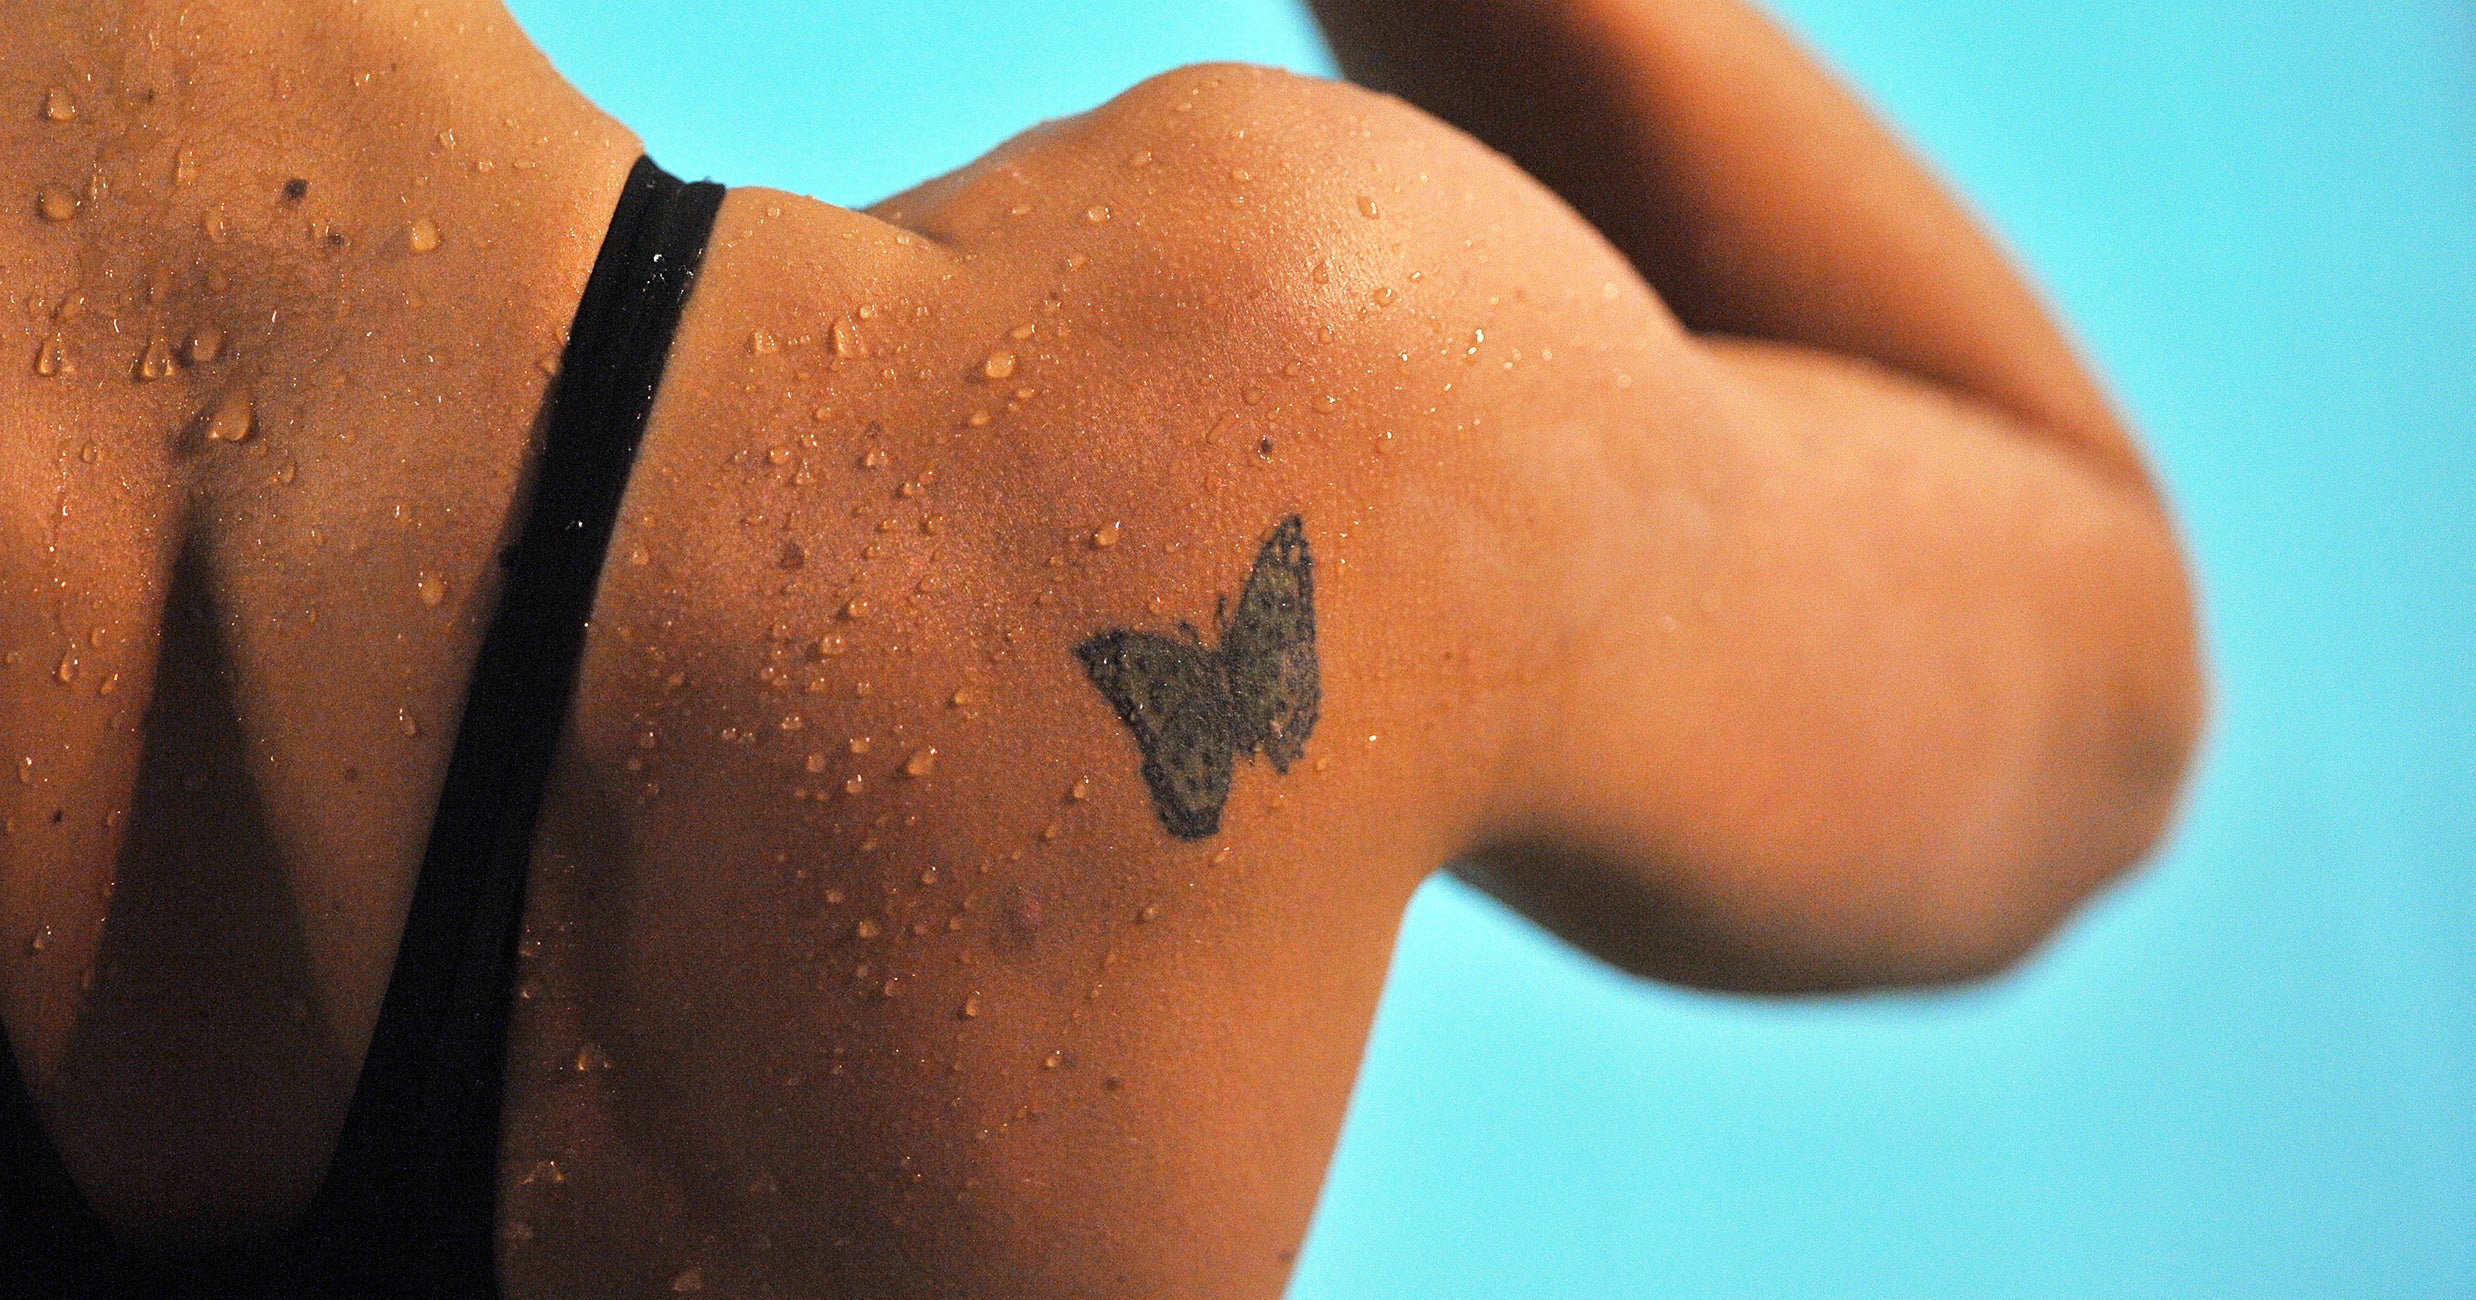 Butterfly Tattoo Ideas To Inspire Your Next Design